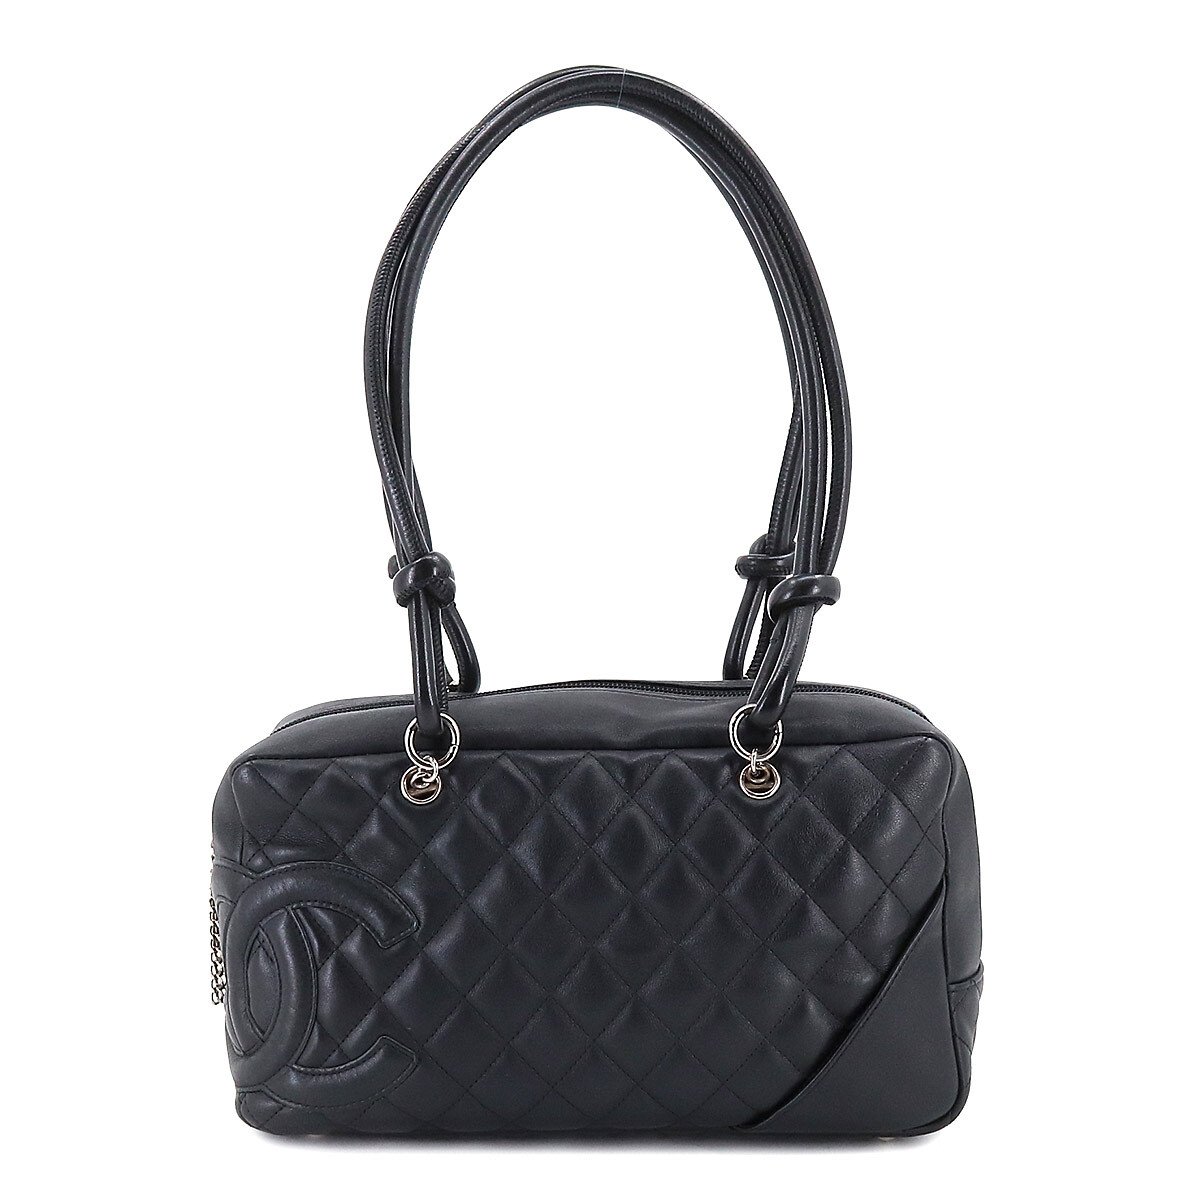 Chanel Quilted Leather Cambon Tote Shoulder Bag